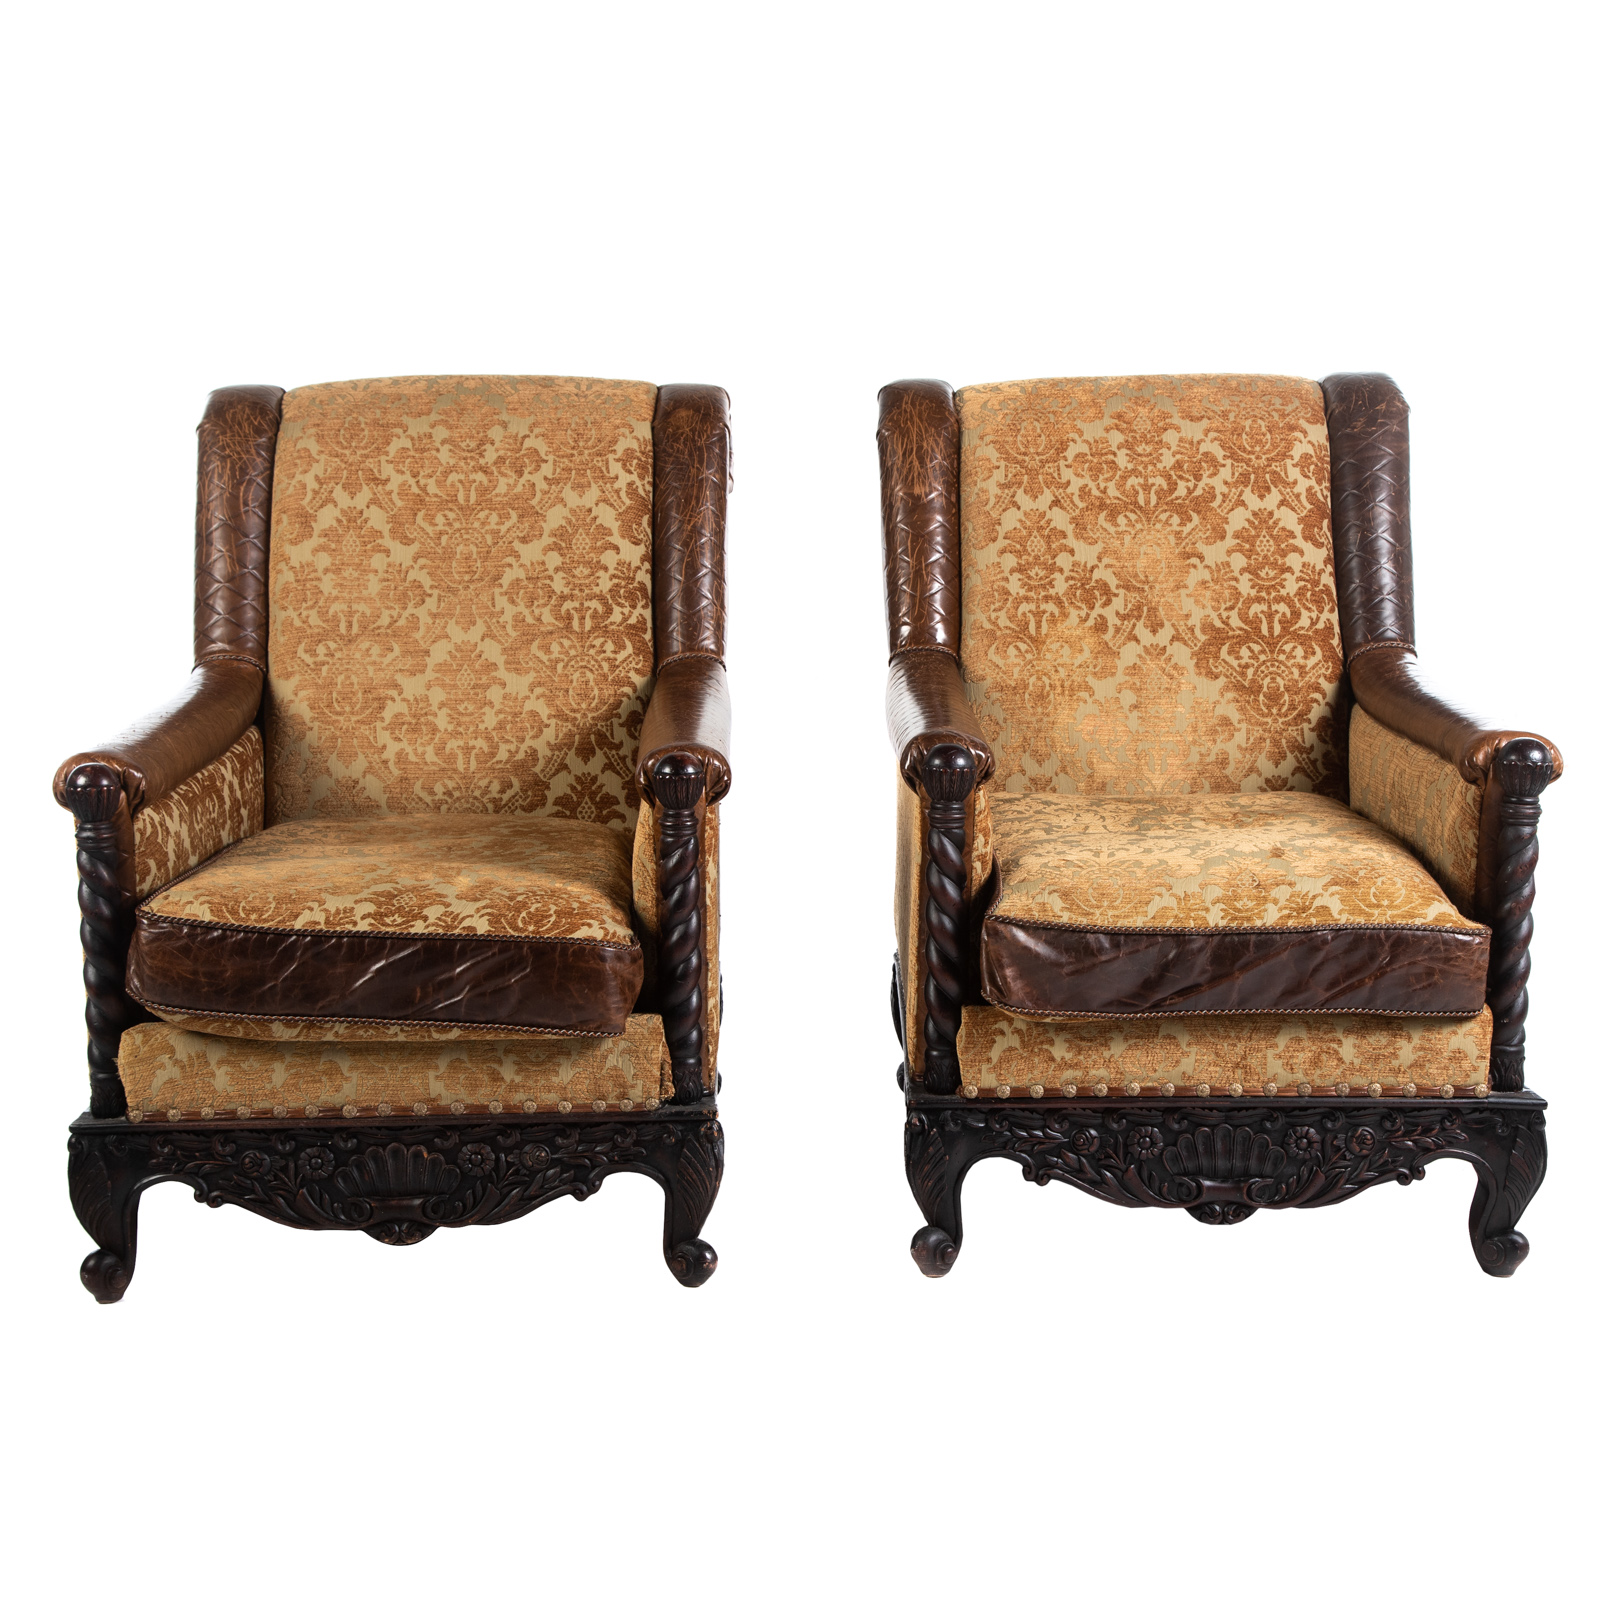 A PAIR OF KEY CITY LEATHER & UPHOLSTERED